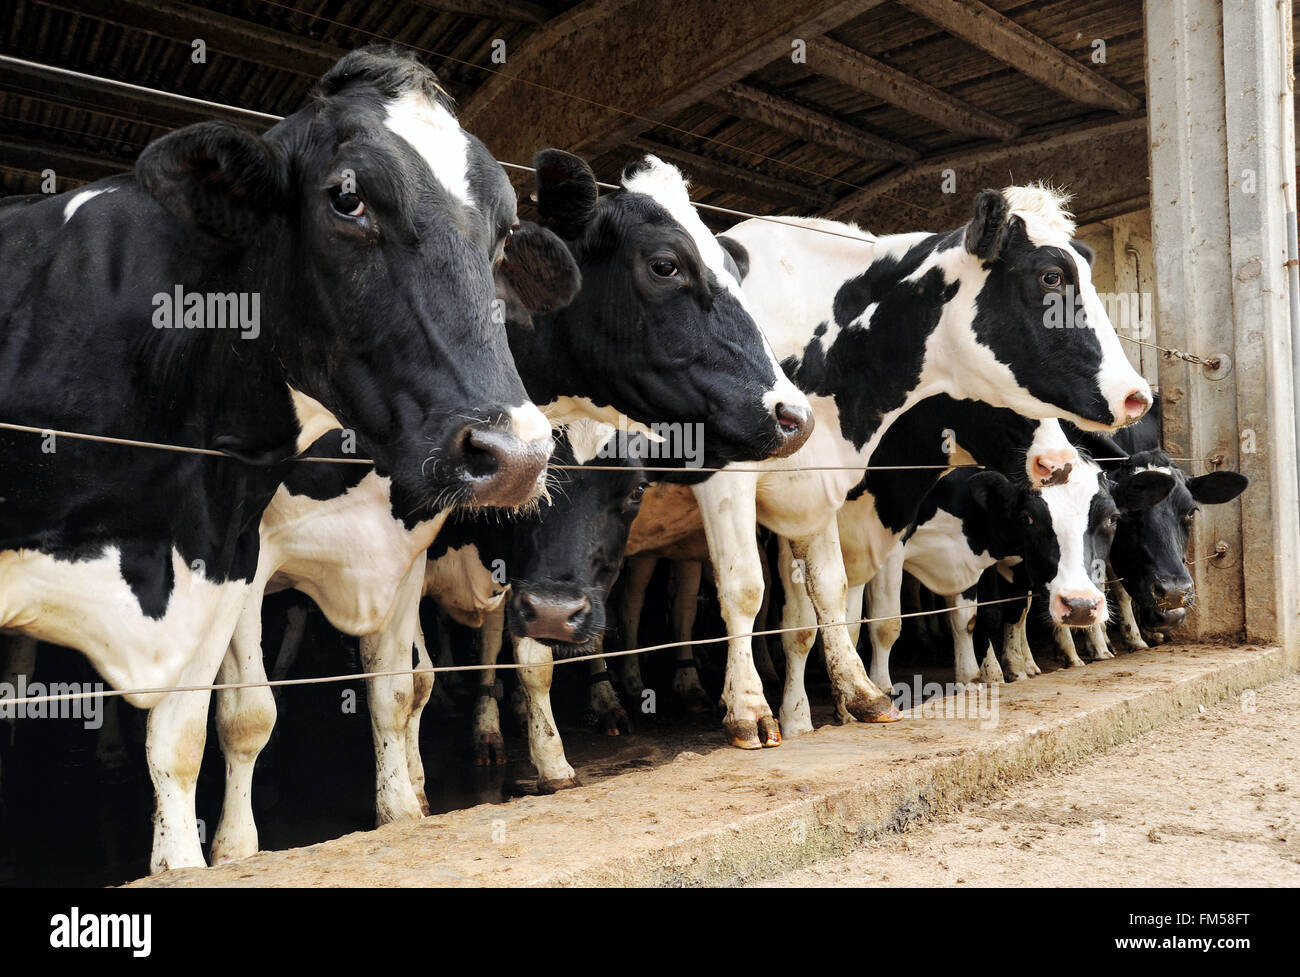 Row of Holstein dairy cows penned in a barn on a farm pushing their heads through the wires to look outside Stock Photo